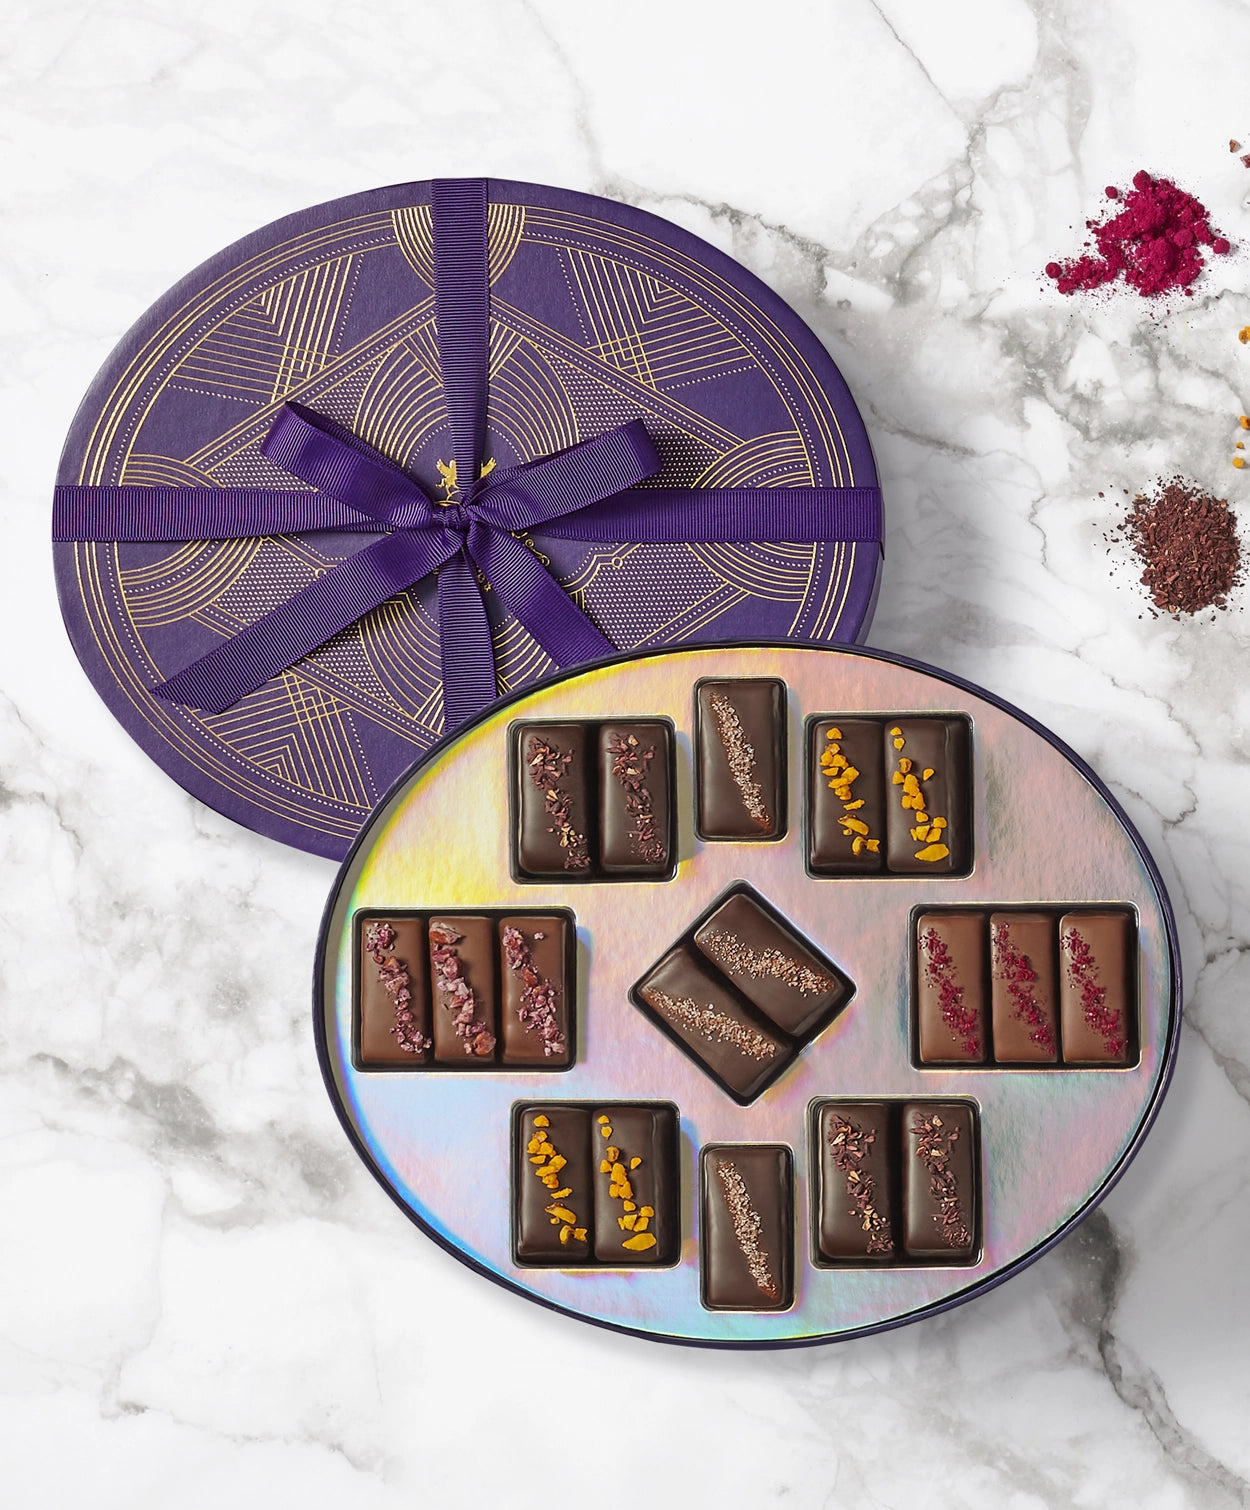 Vosges Exotic Caramel collection sits open displaying eighteen chocolate enrobed caramels beside four piles of colorful nuts and toppings on a marble countertop.